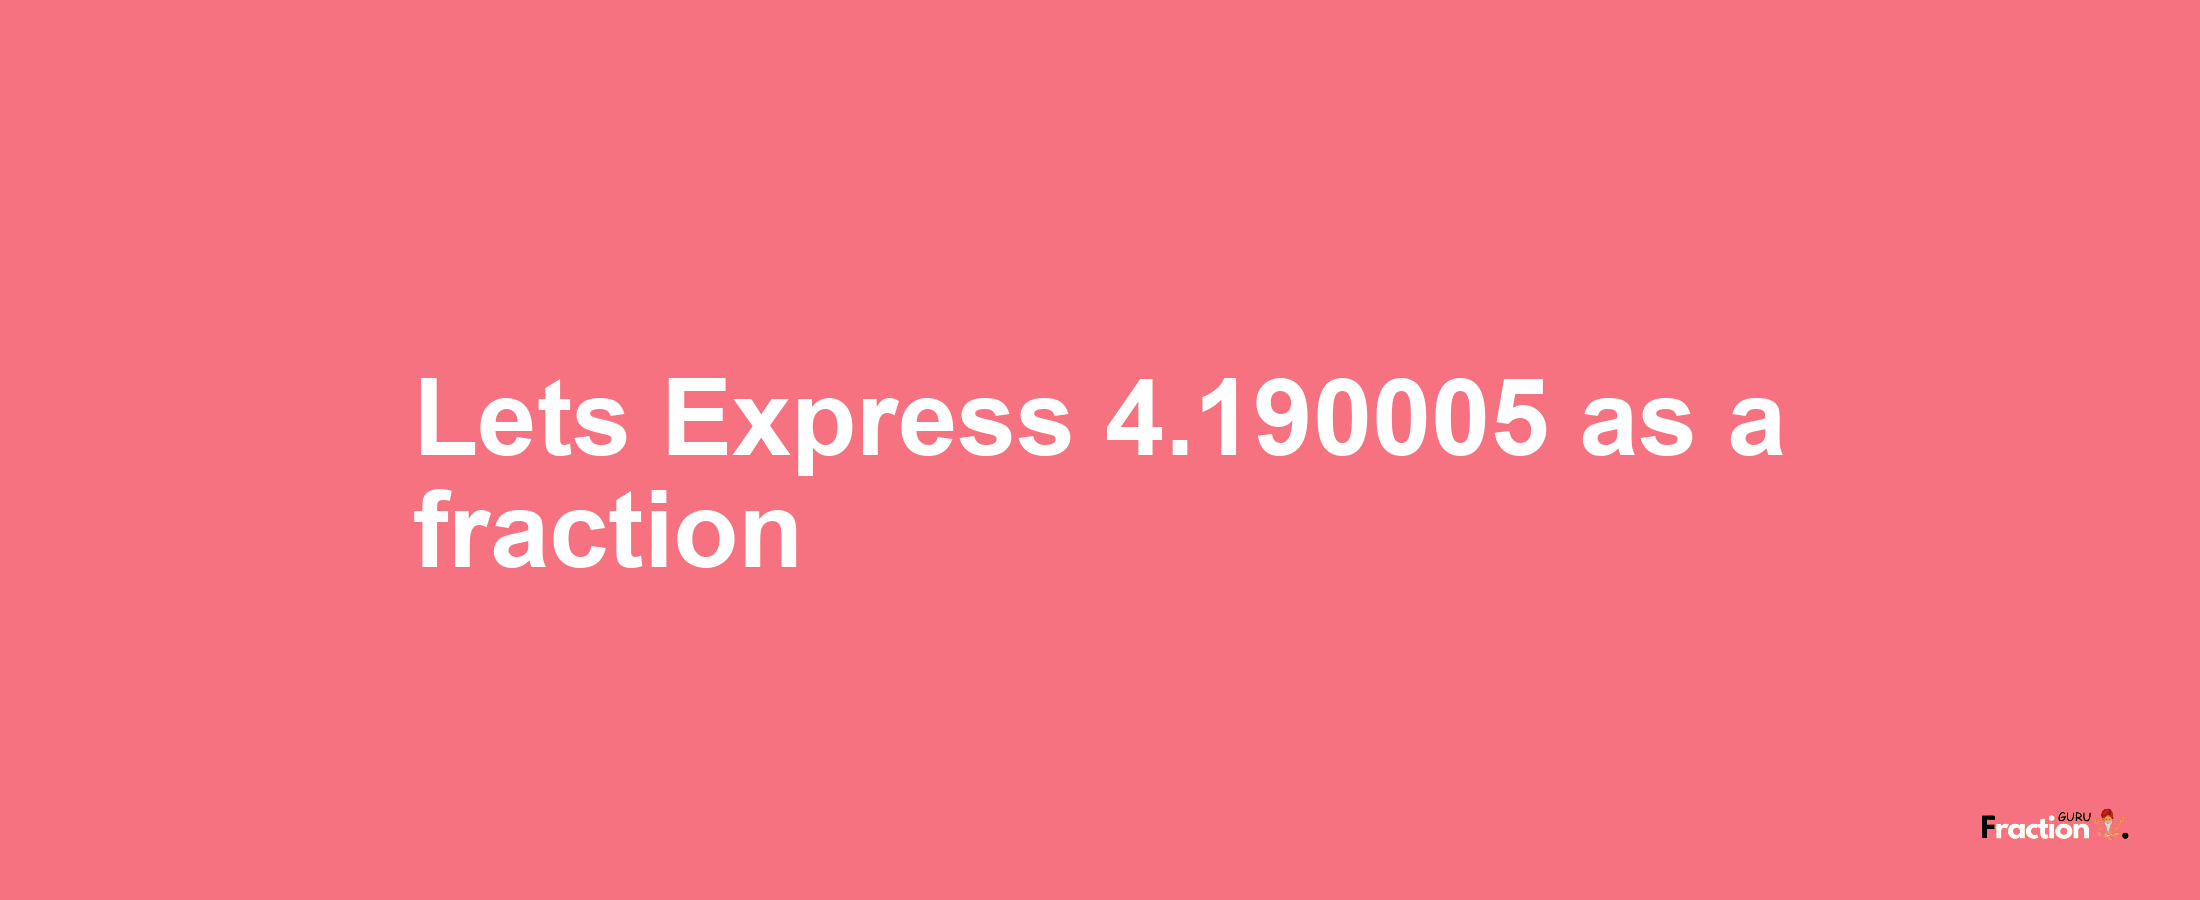 Lets Express 4.190005 as afraction